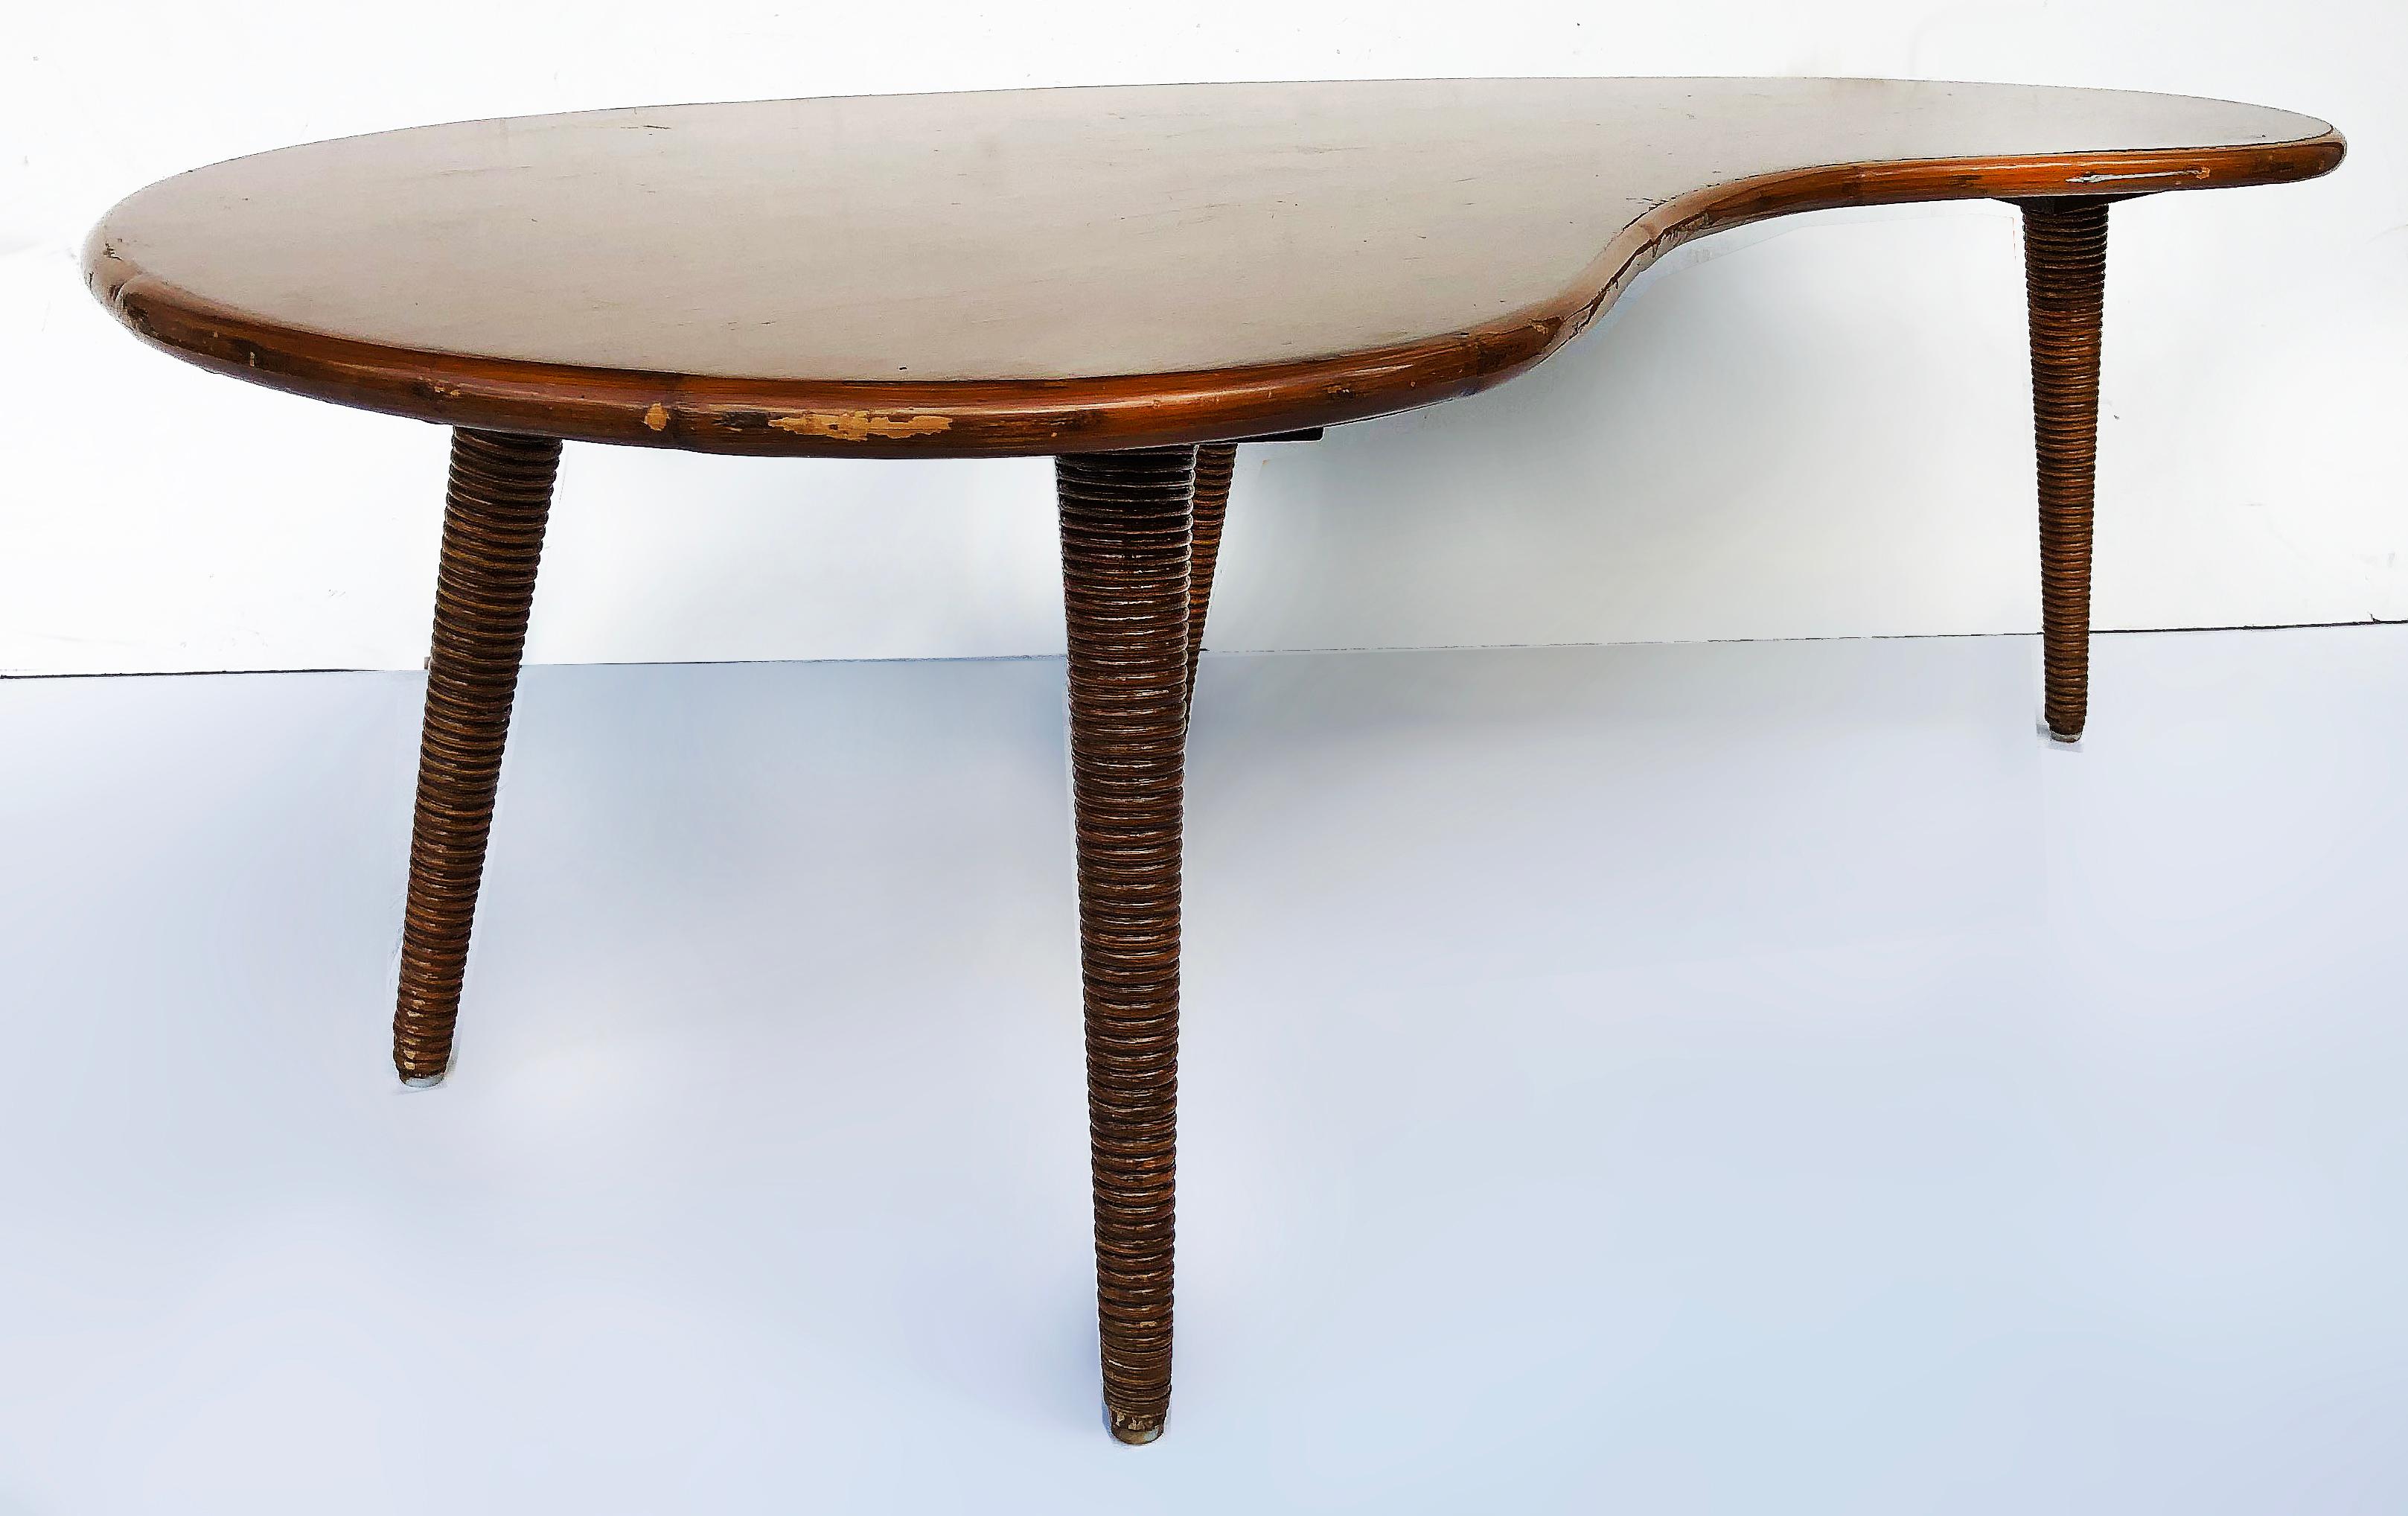 American Mid-Century Modern Biomorphic Form Coffee Table with Tapered Reed Legs